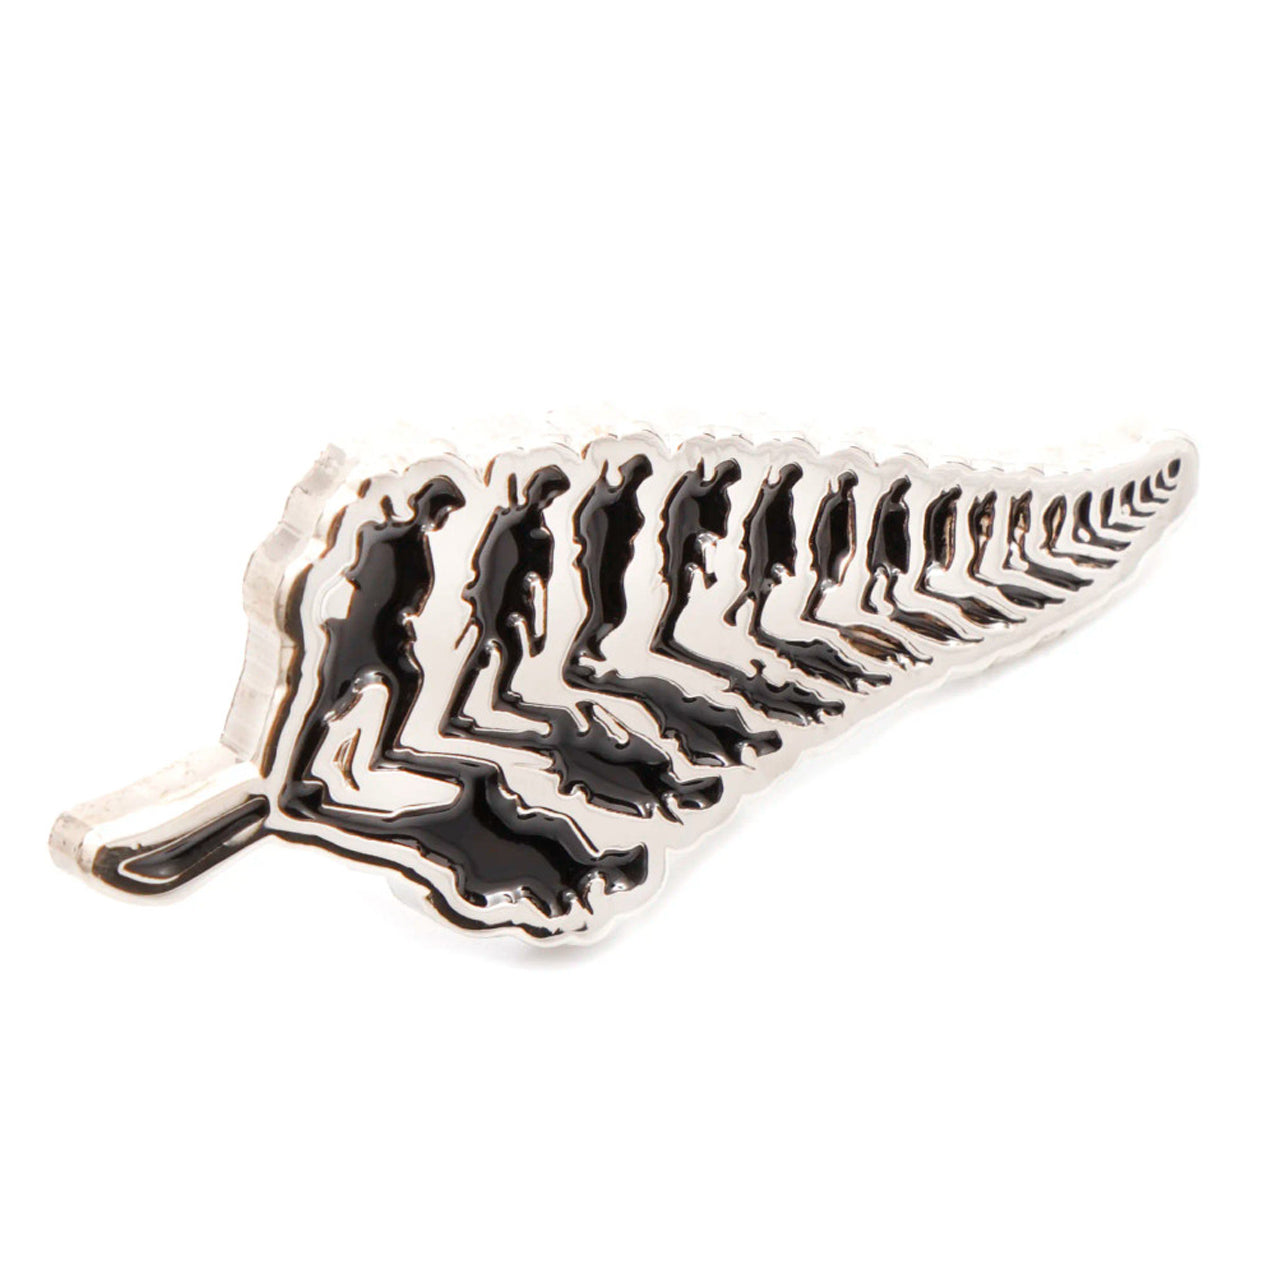 The Soldiers Fern Fond Limited Edition Lapel Pin is a tribute to the rich heritage of New Zealand's brave soldiers and their enduring connection to the iconic silver fern. This exquisite lapel pin marries tradition and contemporary design, making it a must-have collector's item for history enthusiasts and patriots alike. www.defenceqstore.com.au